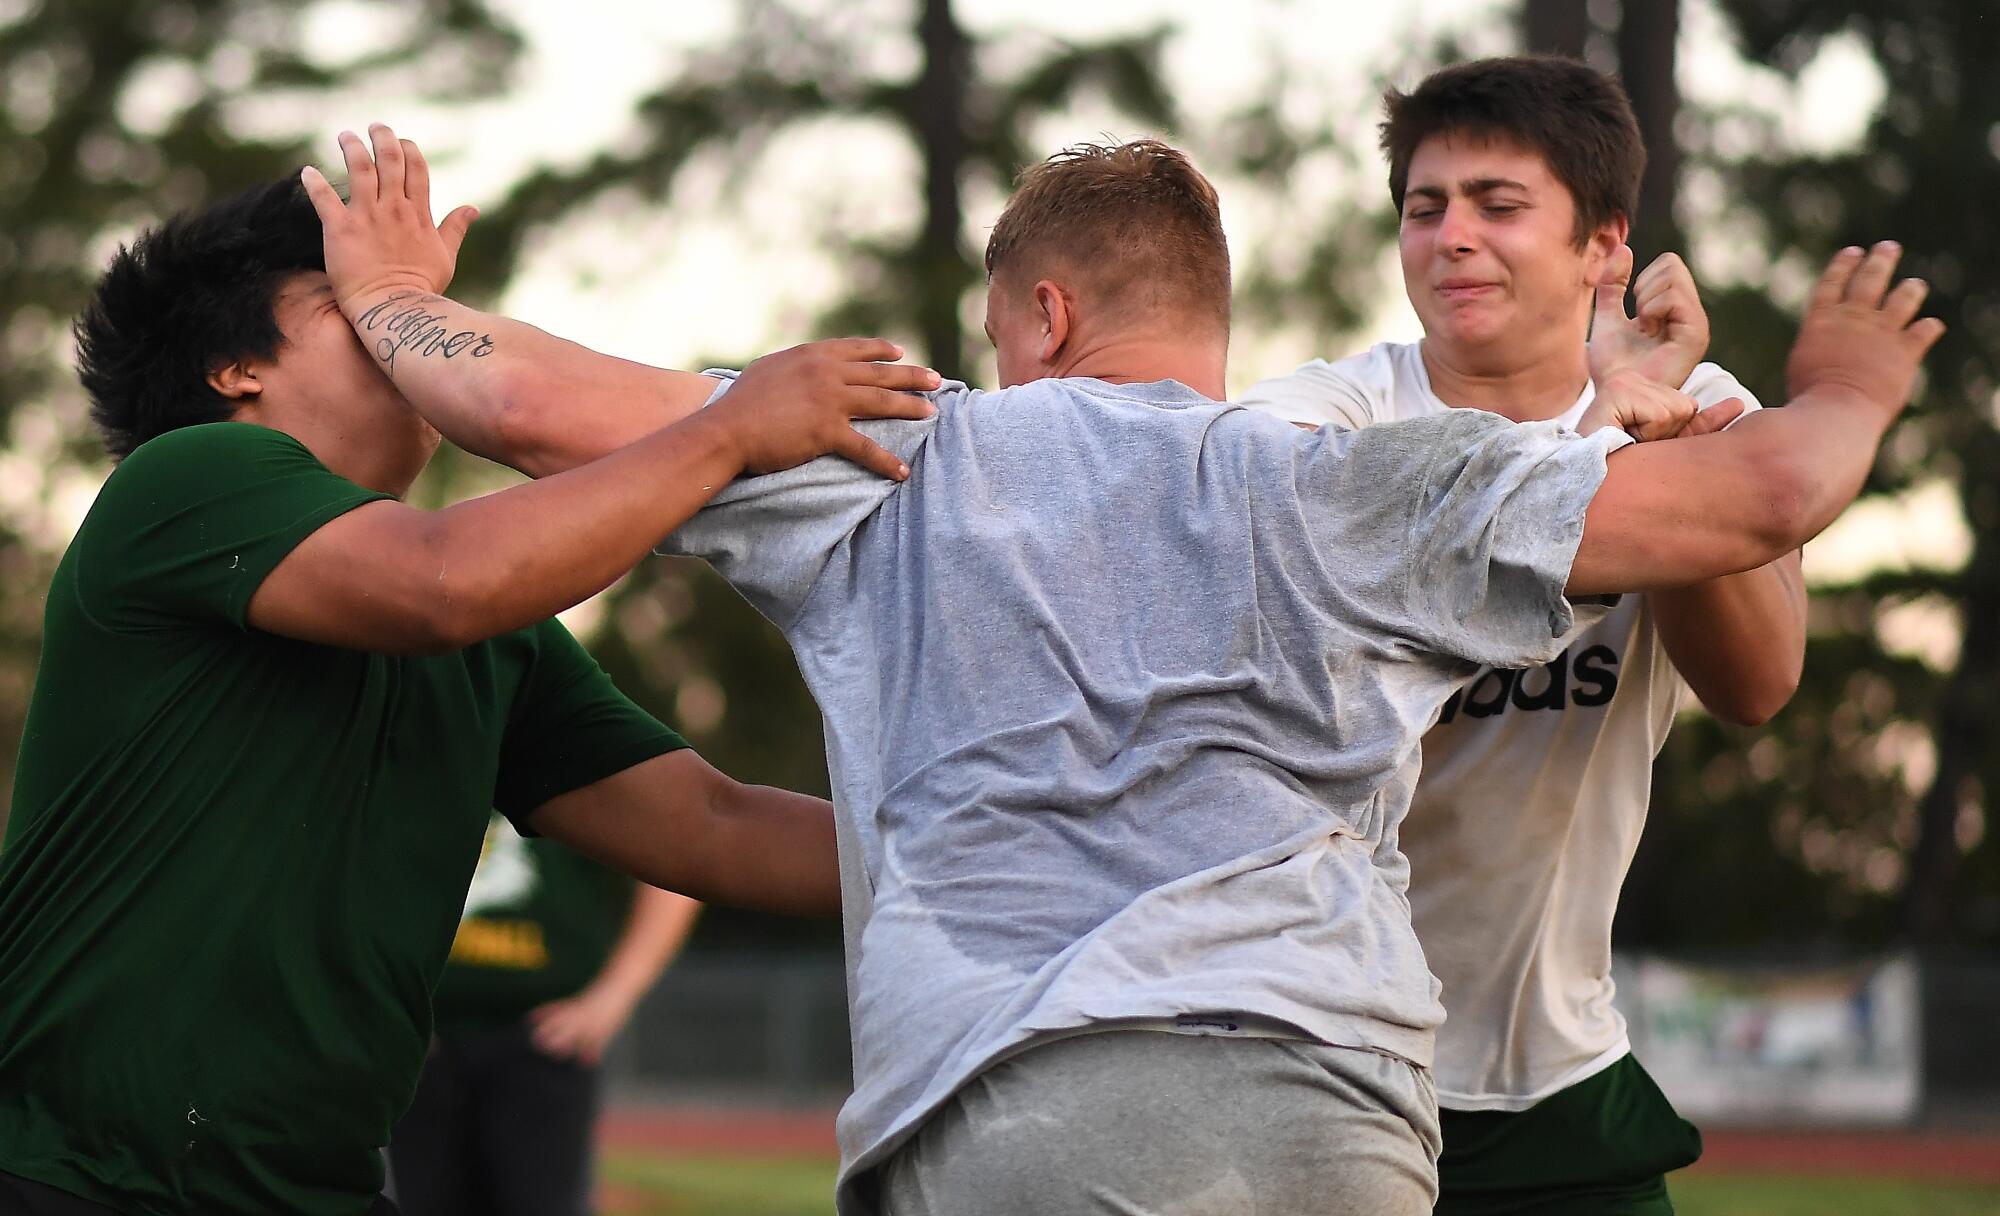 Paradise offensive lineman Ashton Wagner, center, stiff arms teammate Jose Velasquez, left, and holds back Blake White during a team practice session.